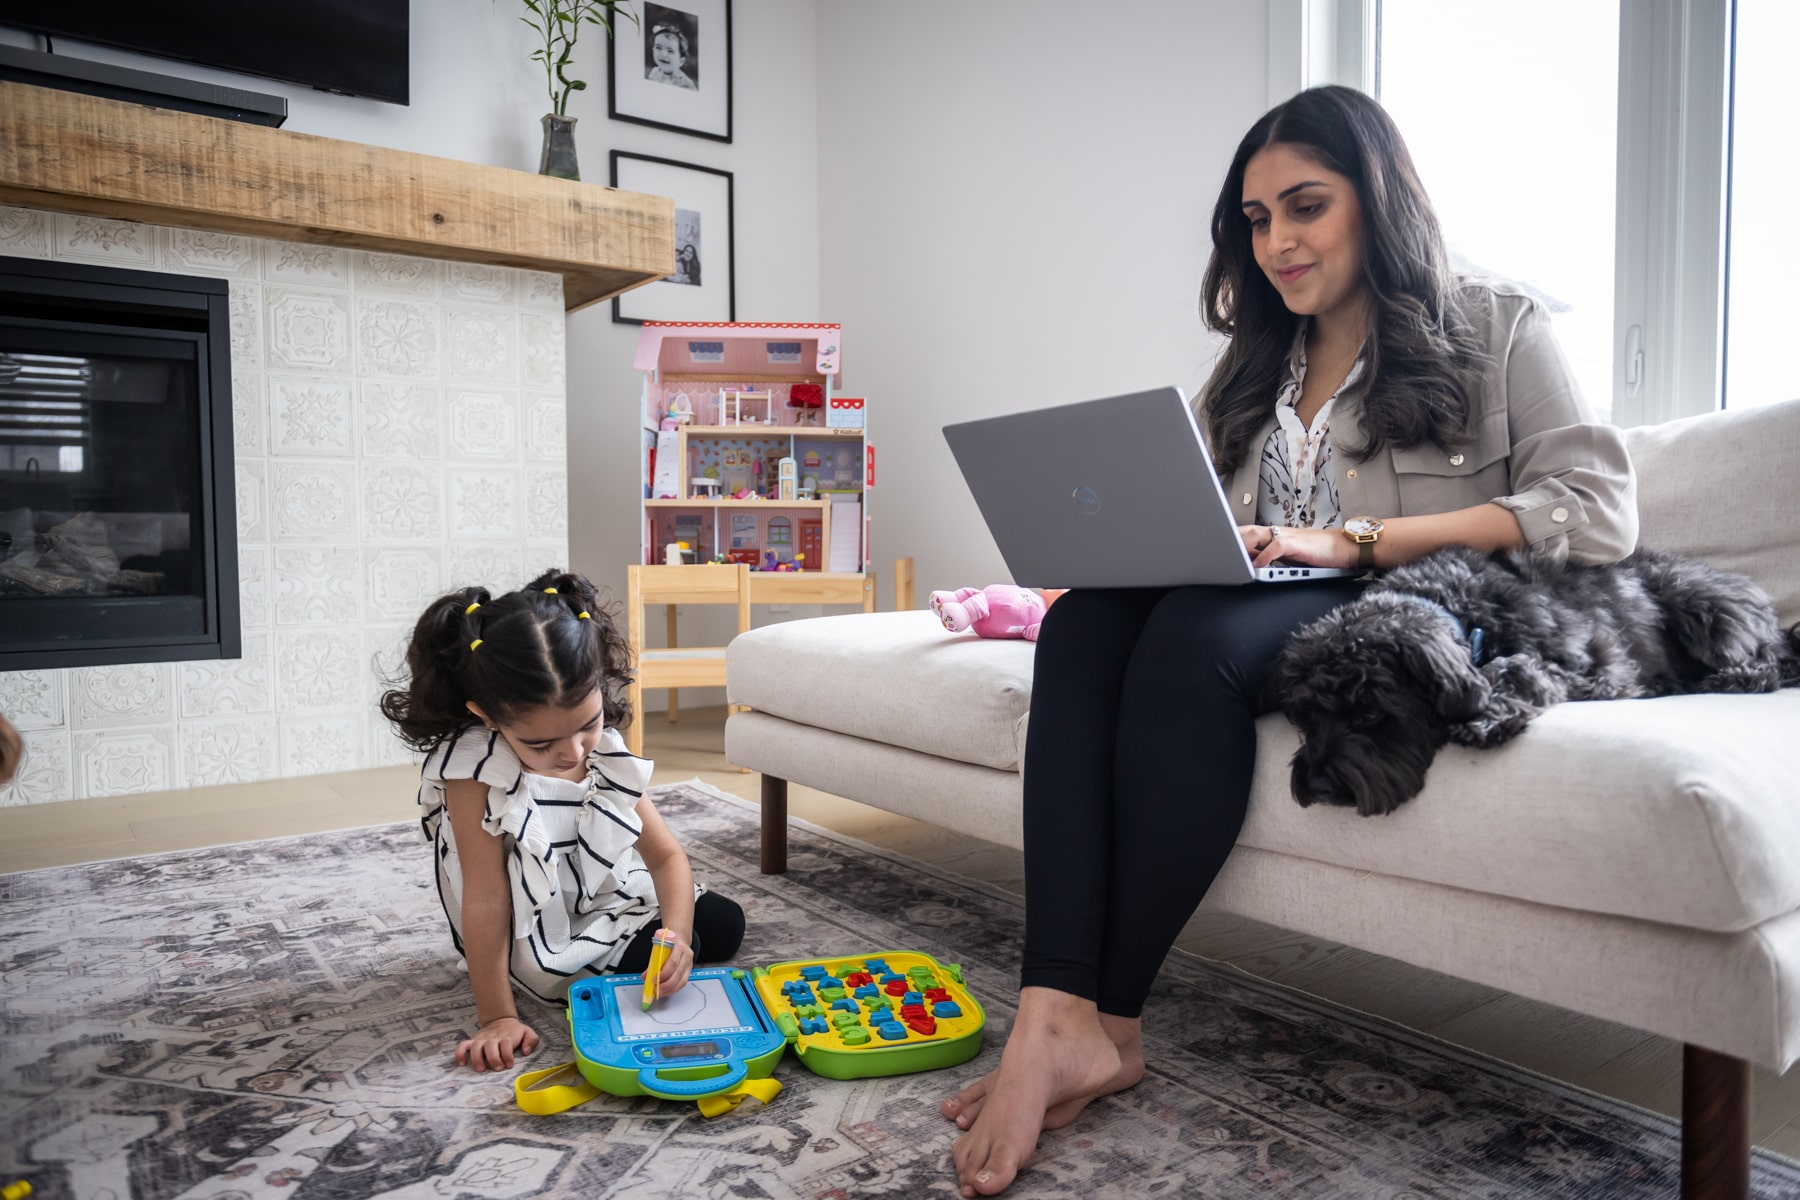 mother sits on couch studying on laptop while child plays nearby